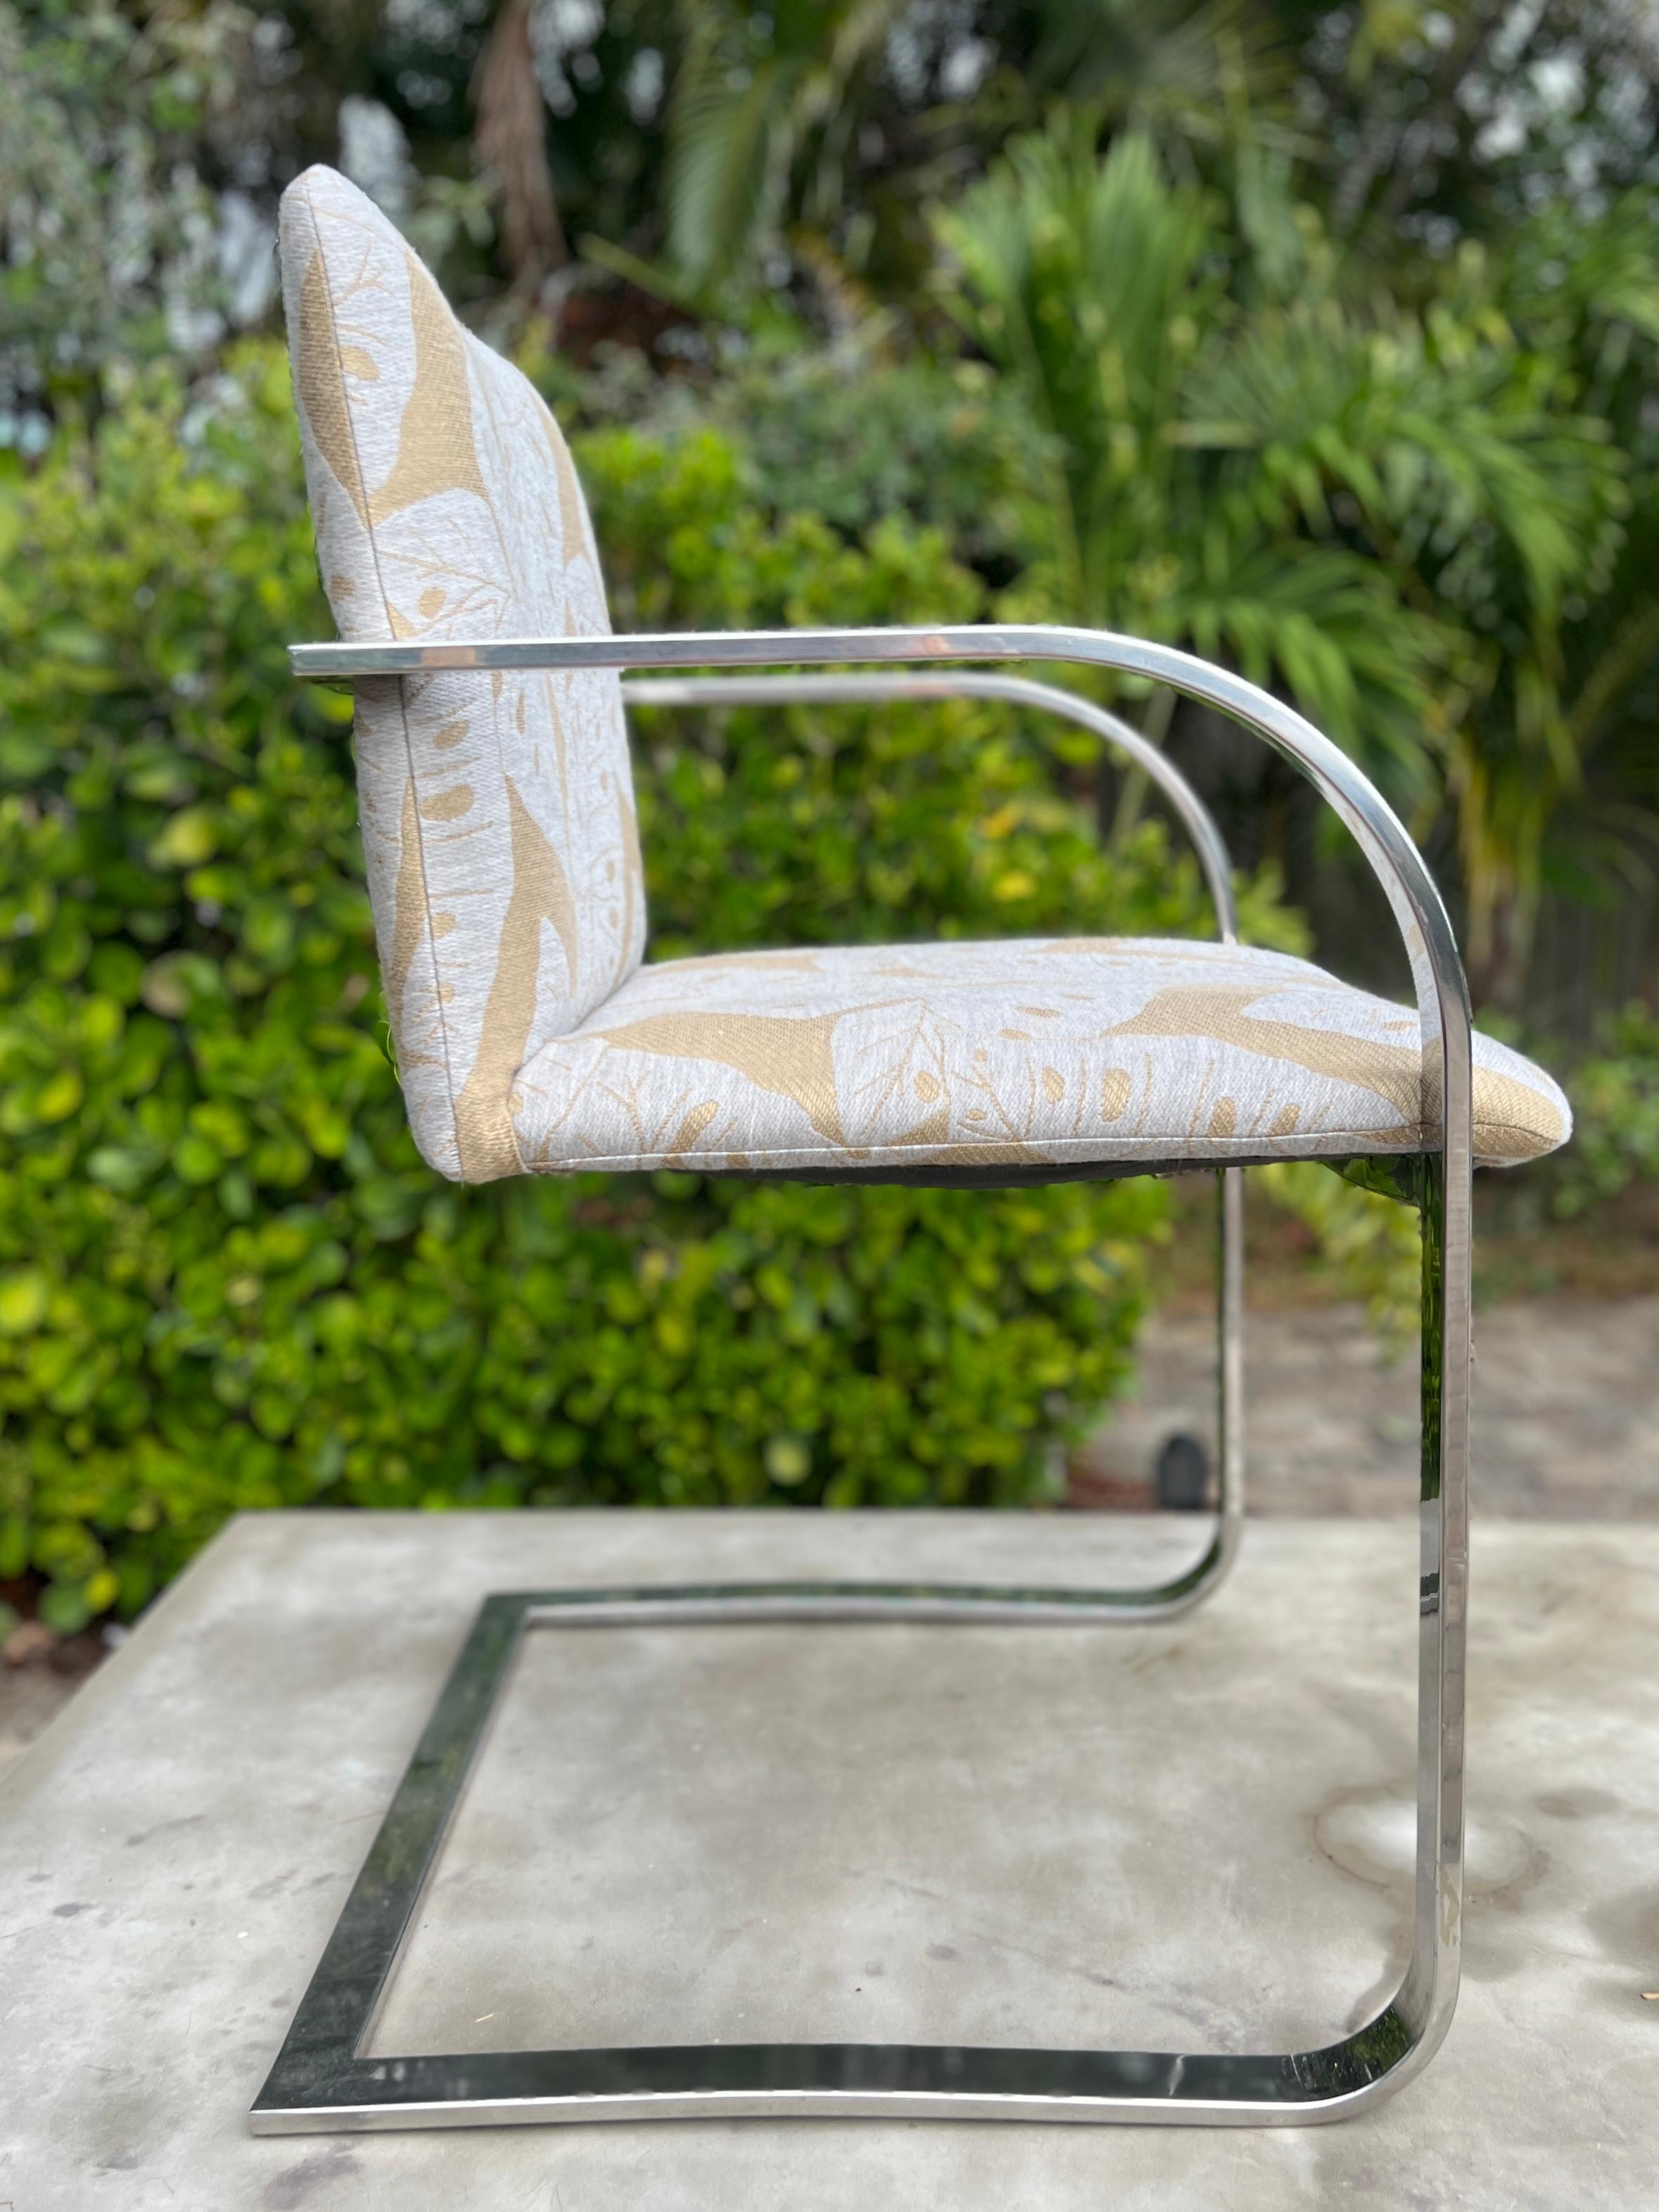 Polished Chrome Desk Chair by Brueton in Woven Tropical Leaves, c. 1970's For Sale